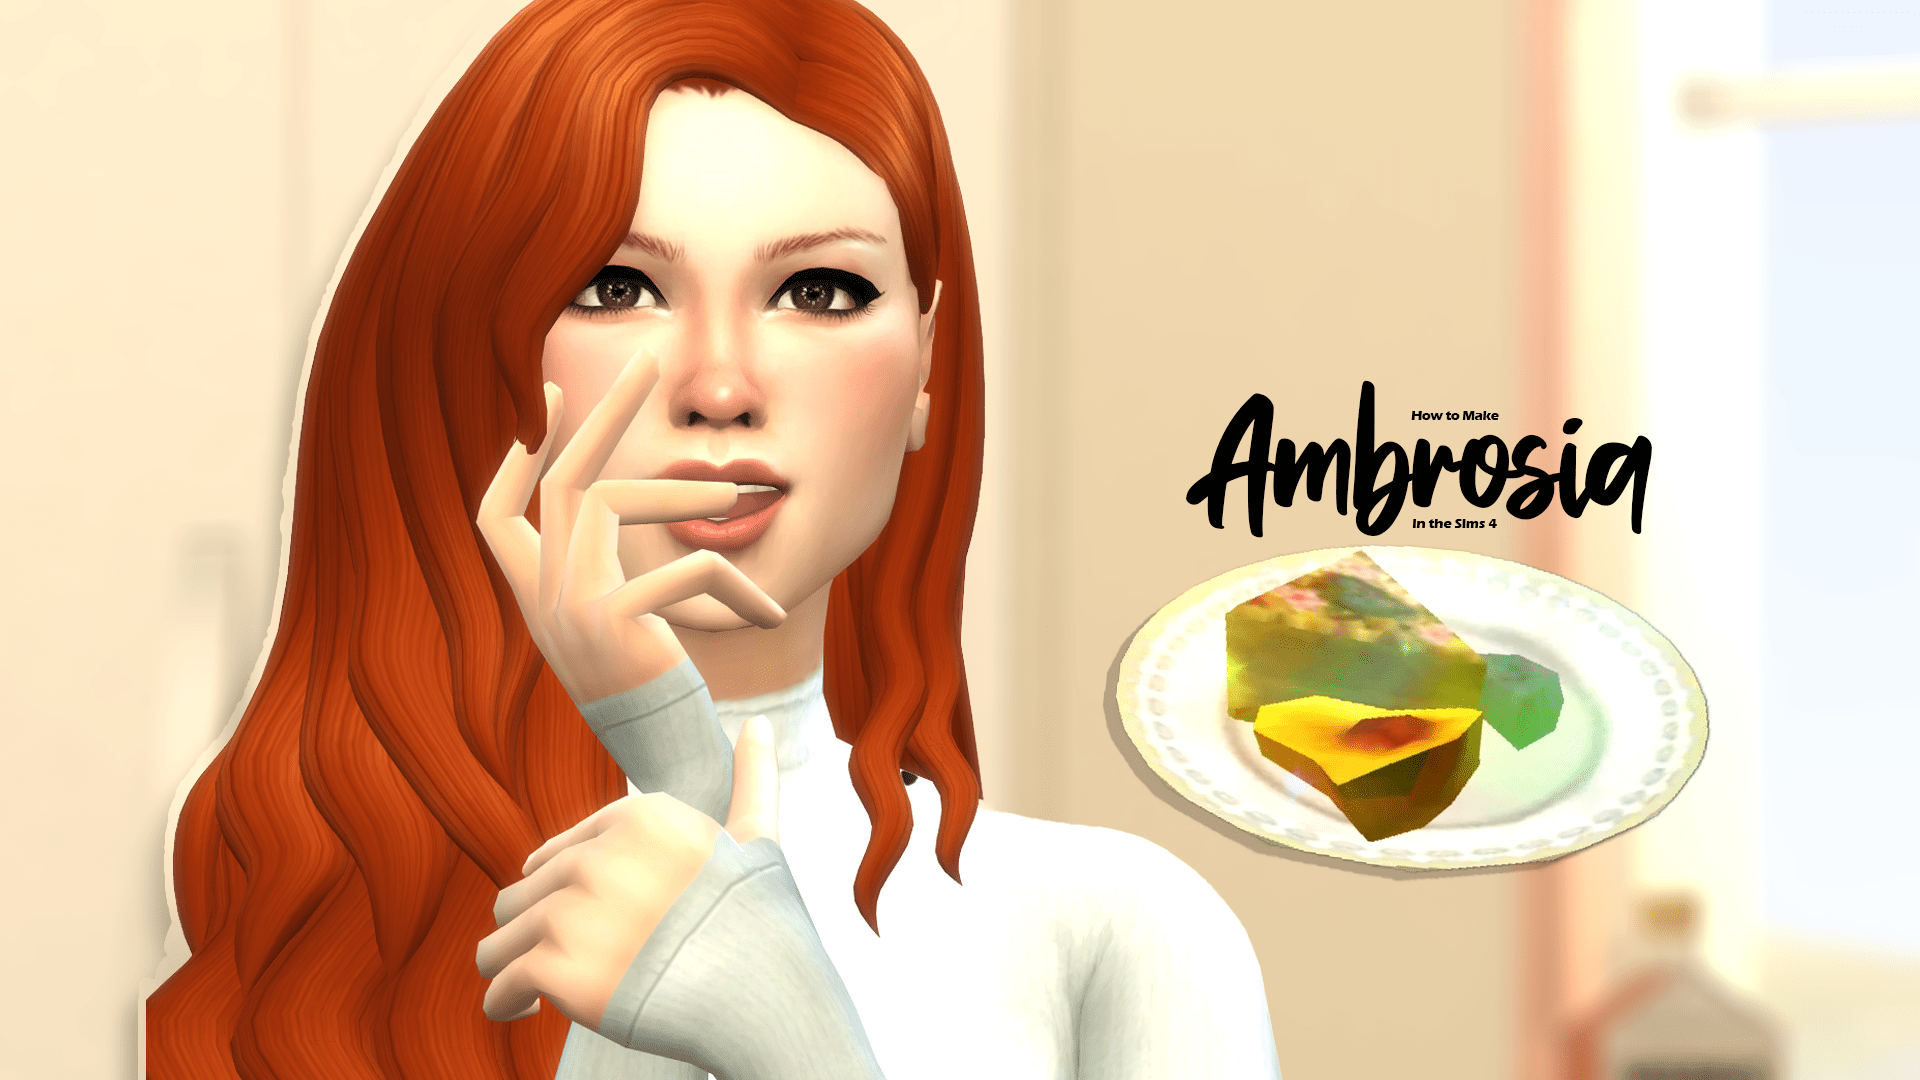 Angelfish Cheat in The Sims 4 (Make Ambrosia Fast!) - Let's Talk Sims